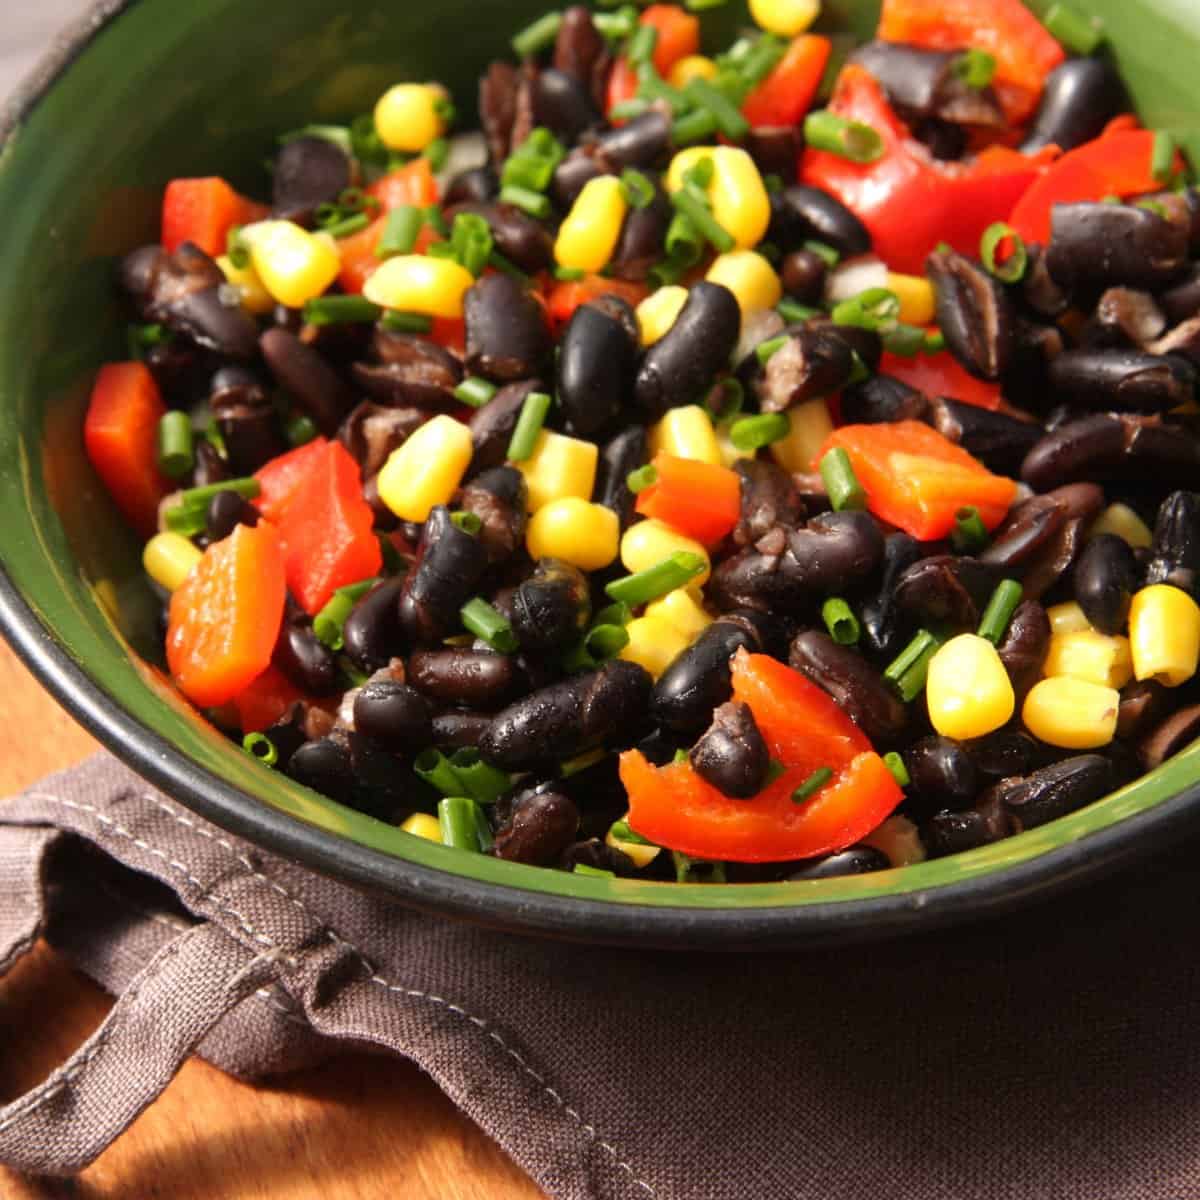 How to cook with black beans